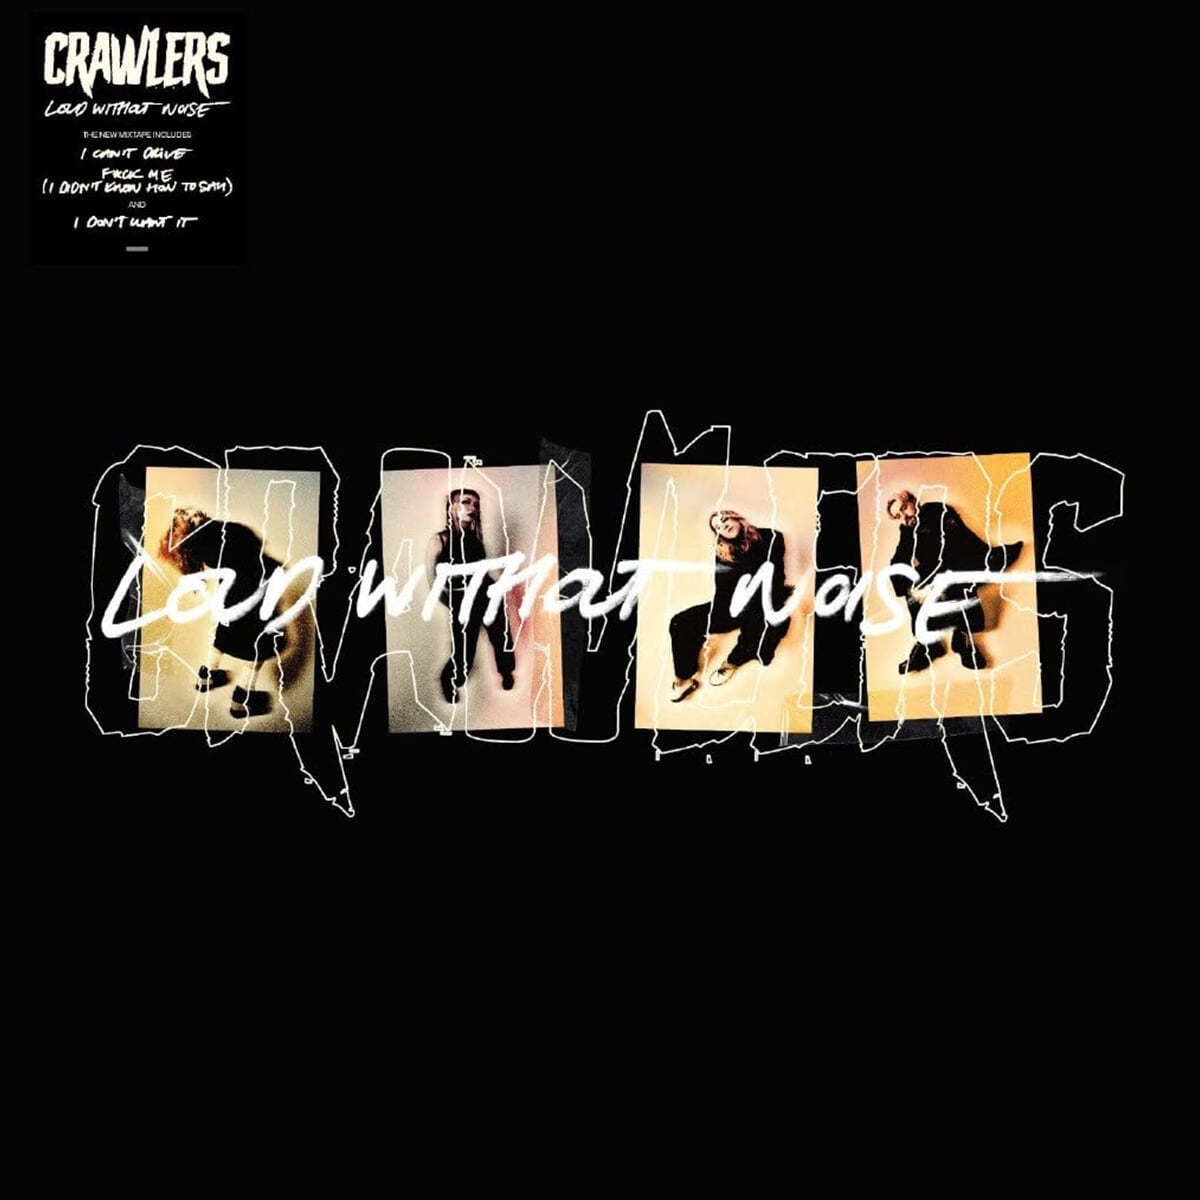 Crawlers (크롤러스) - Without Noise